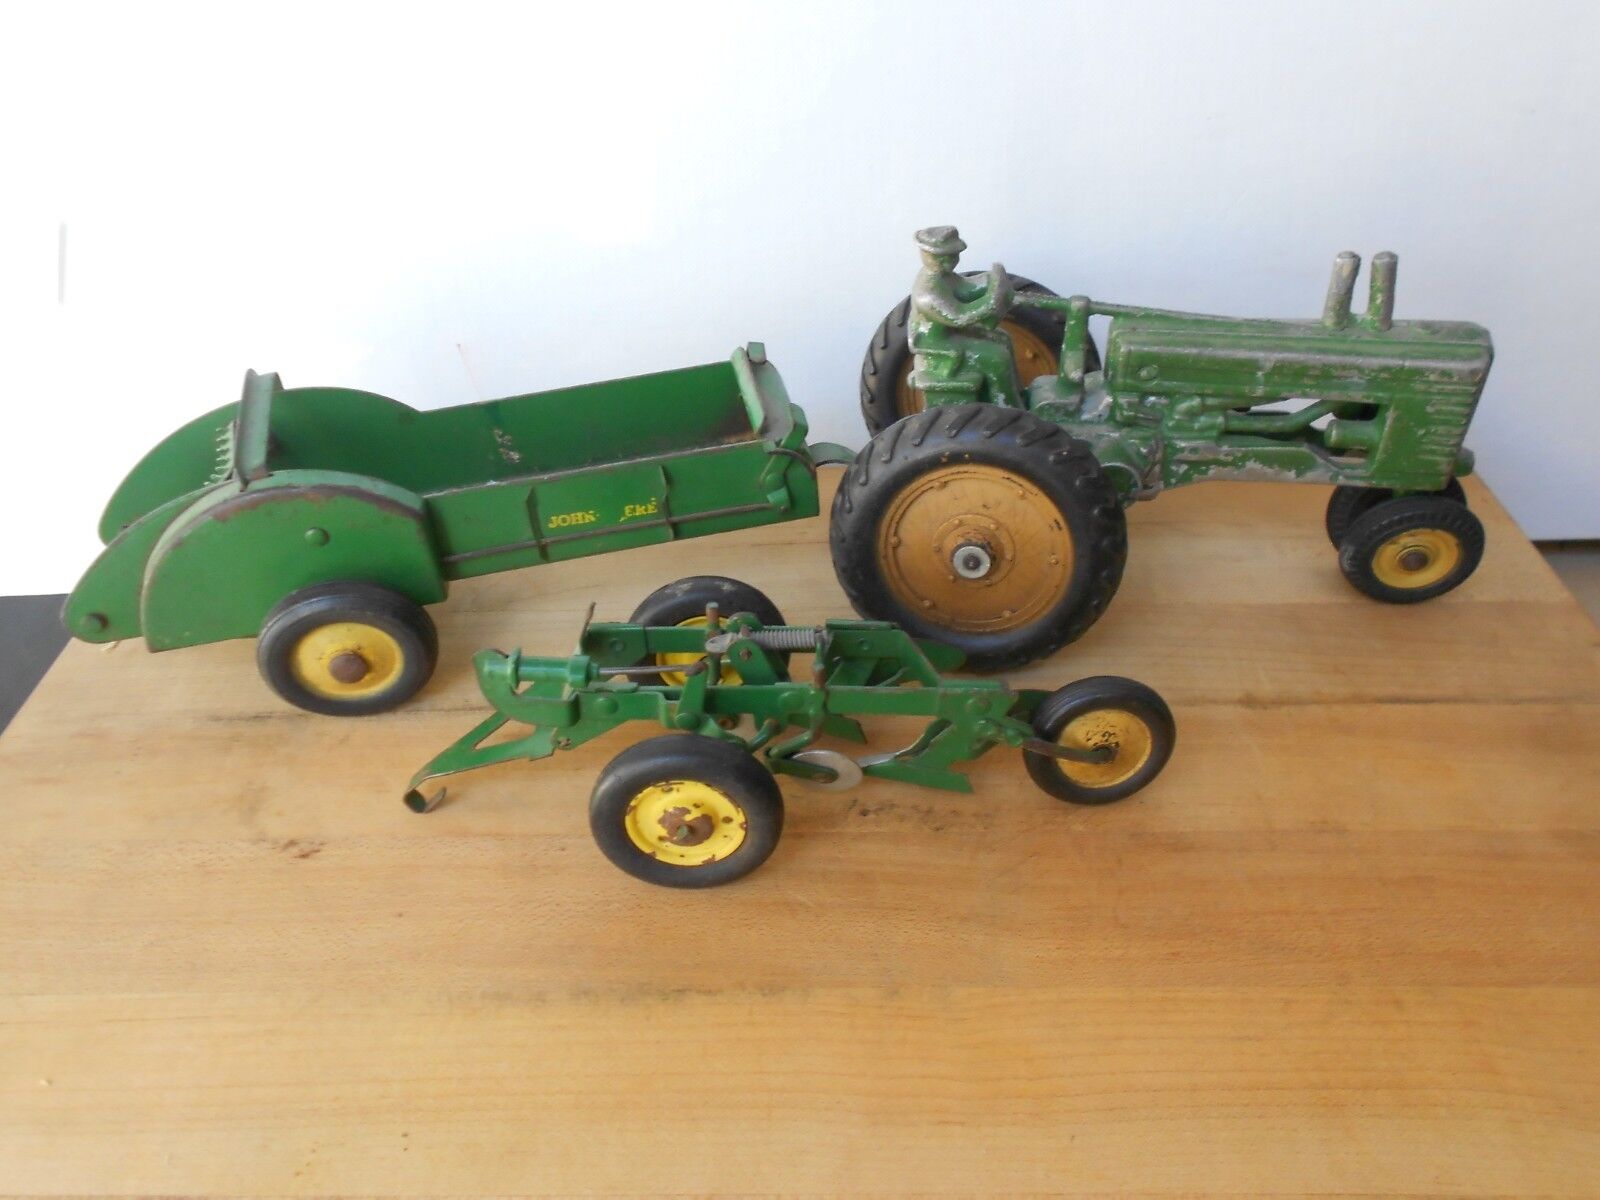  John Deere tractor with Plow TOY ANTIQUE VINTAGE CAST Lot 3 Items        